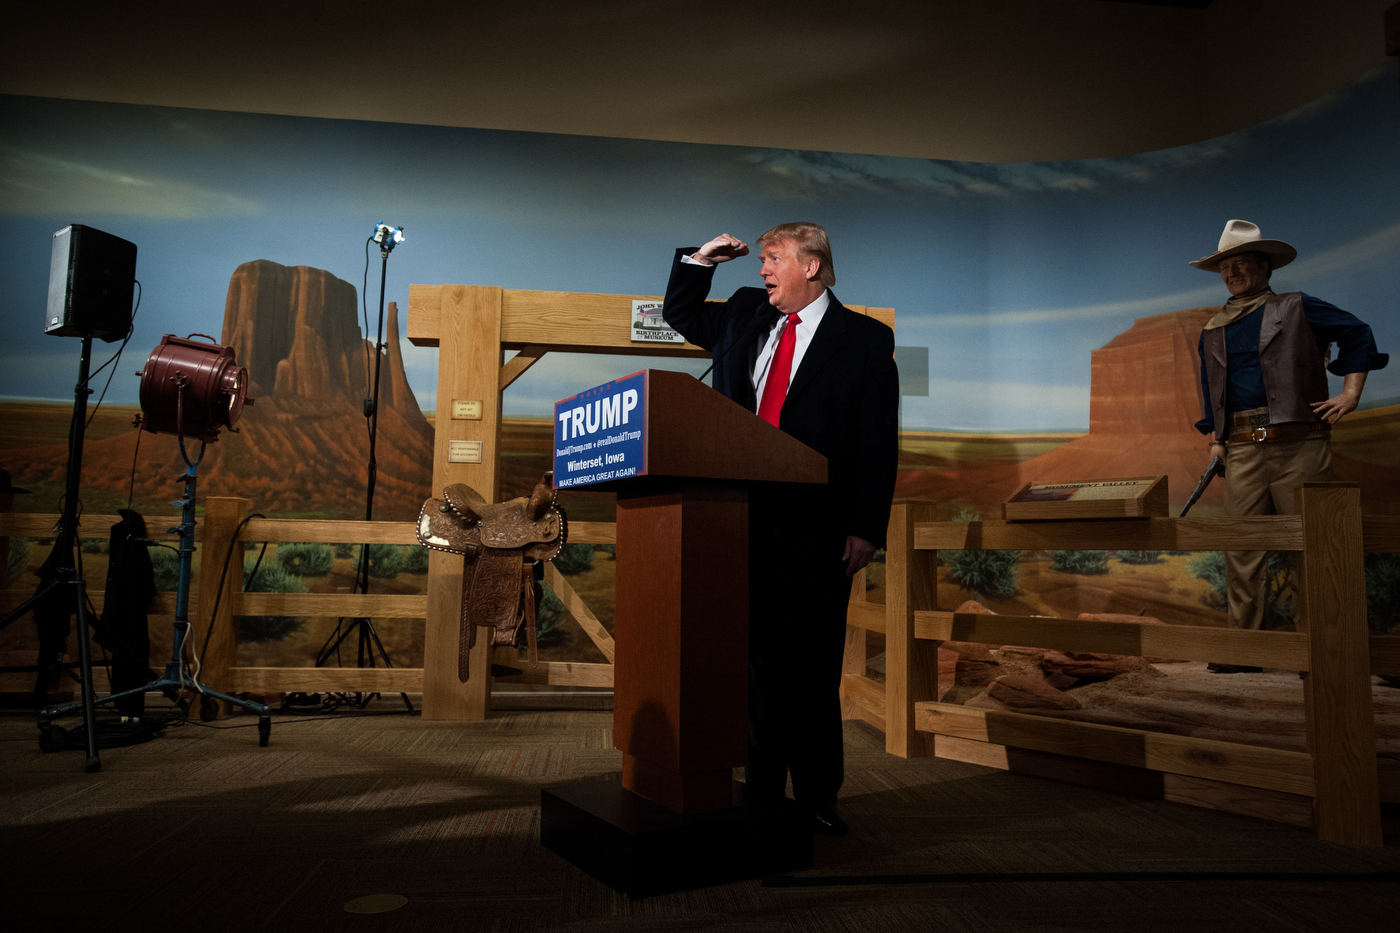  Republican U.S. presidential candidate Donald Trump looks out into the crowd for his Iowa campaign manager while speaking press conference at the John Wayne Birthplace and Museum in Winterset, Iowa on January 19, 2016.  